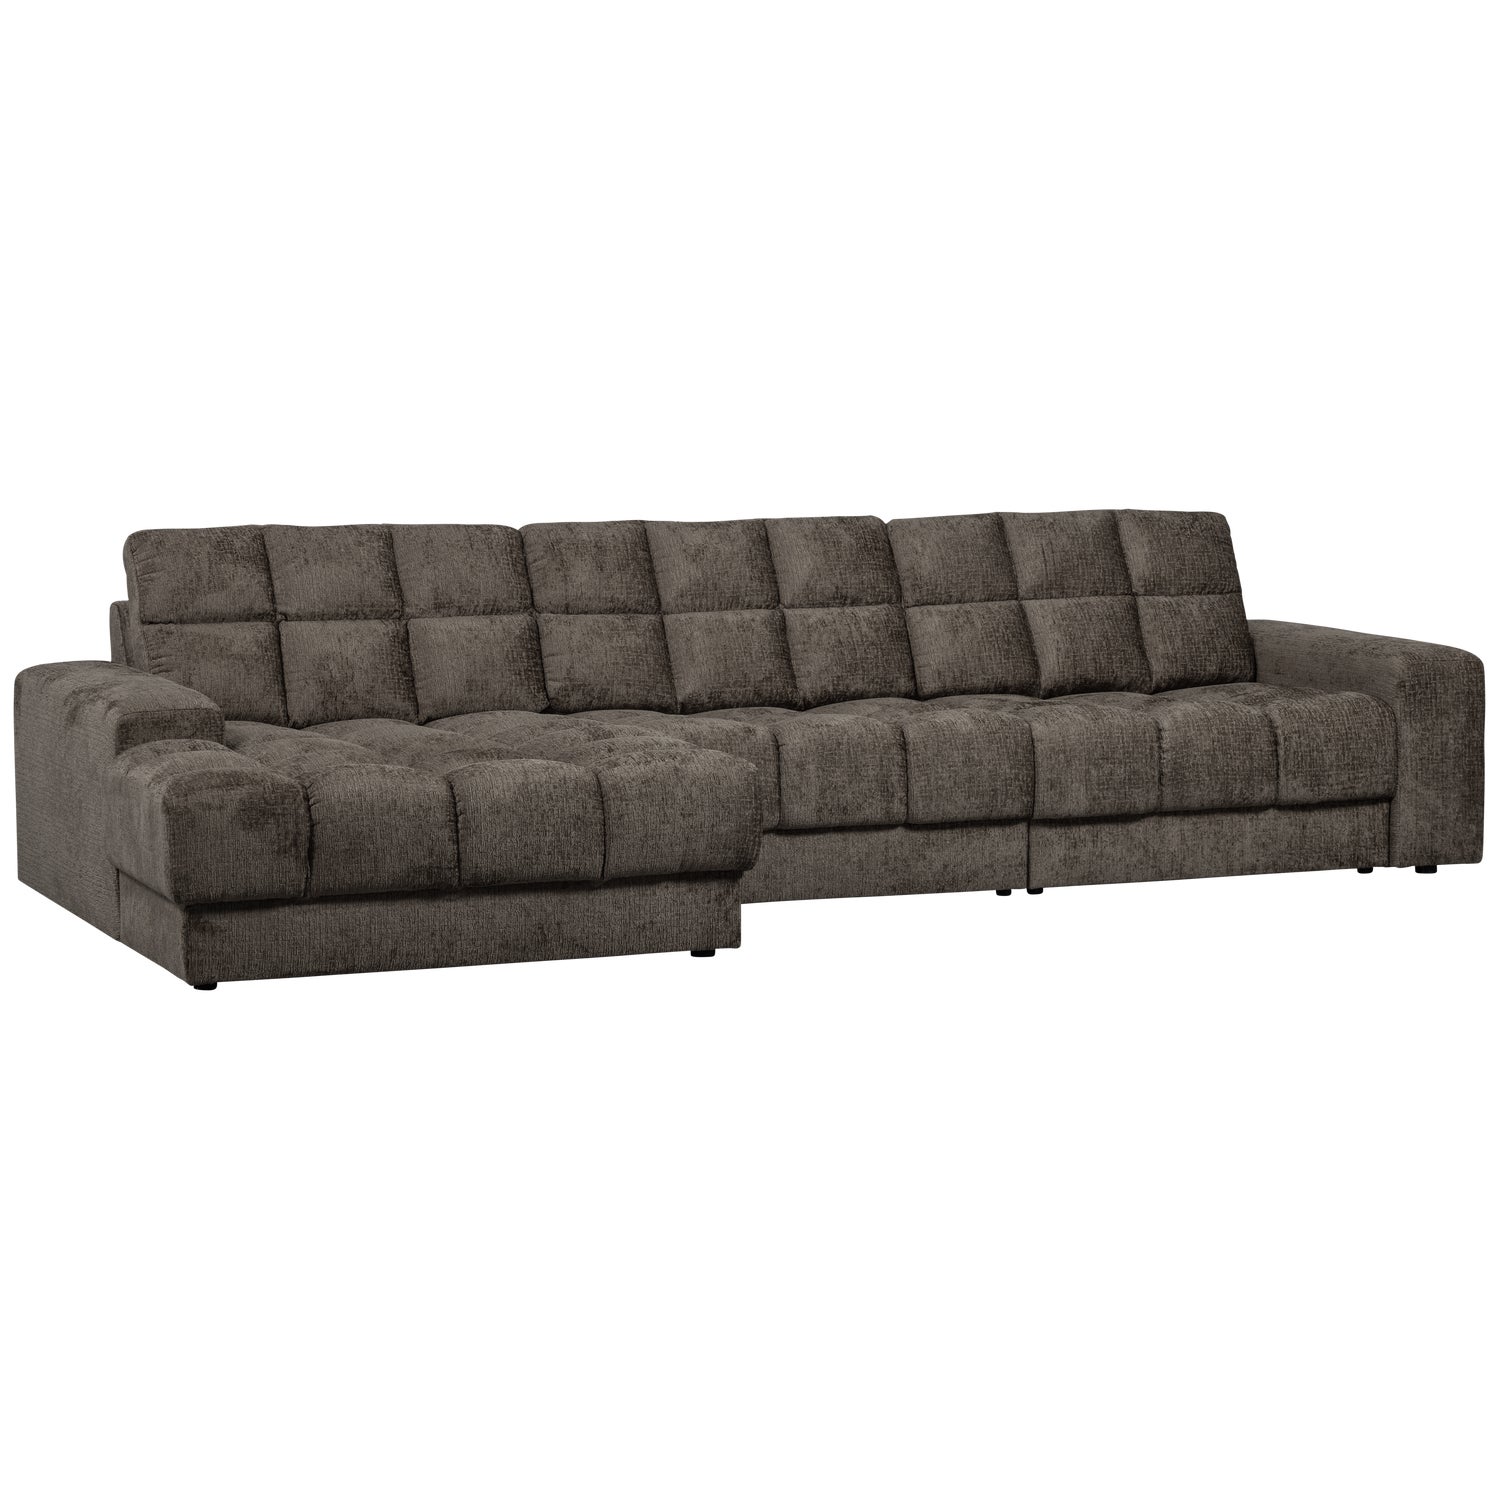 379012-MO-03_VS_WE_Second_date_chaise_longue_links_structure_velvet_mountain.png?auto=webp&format=png&width=1500&height=1500